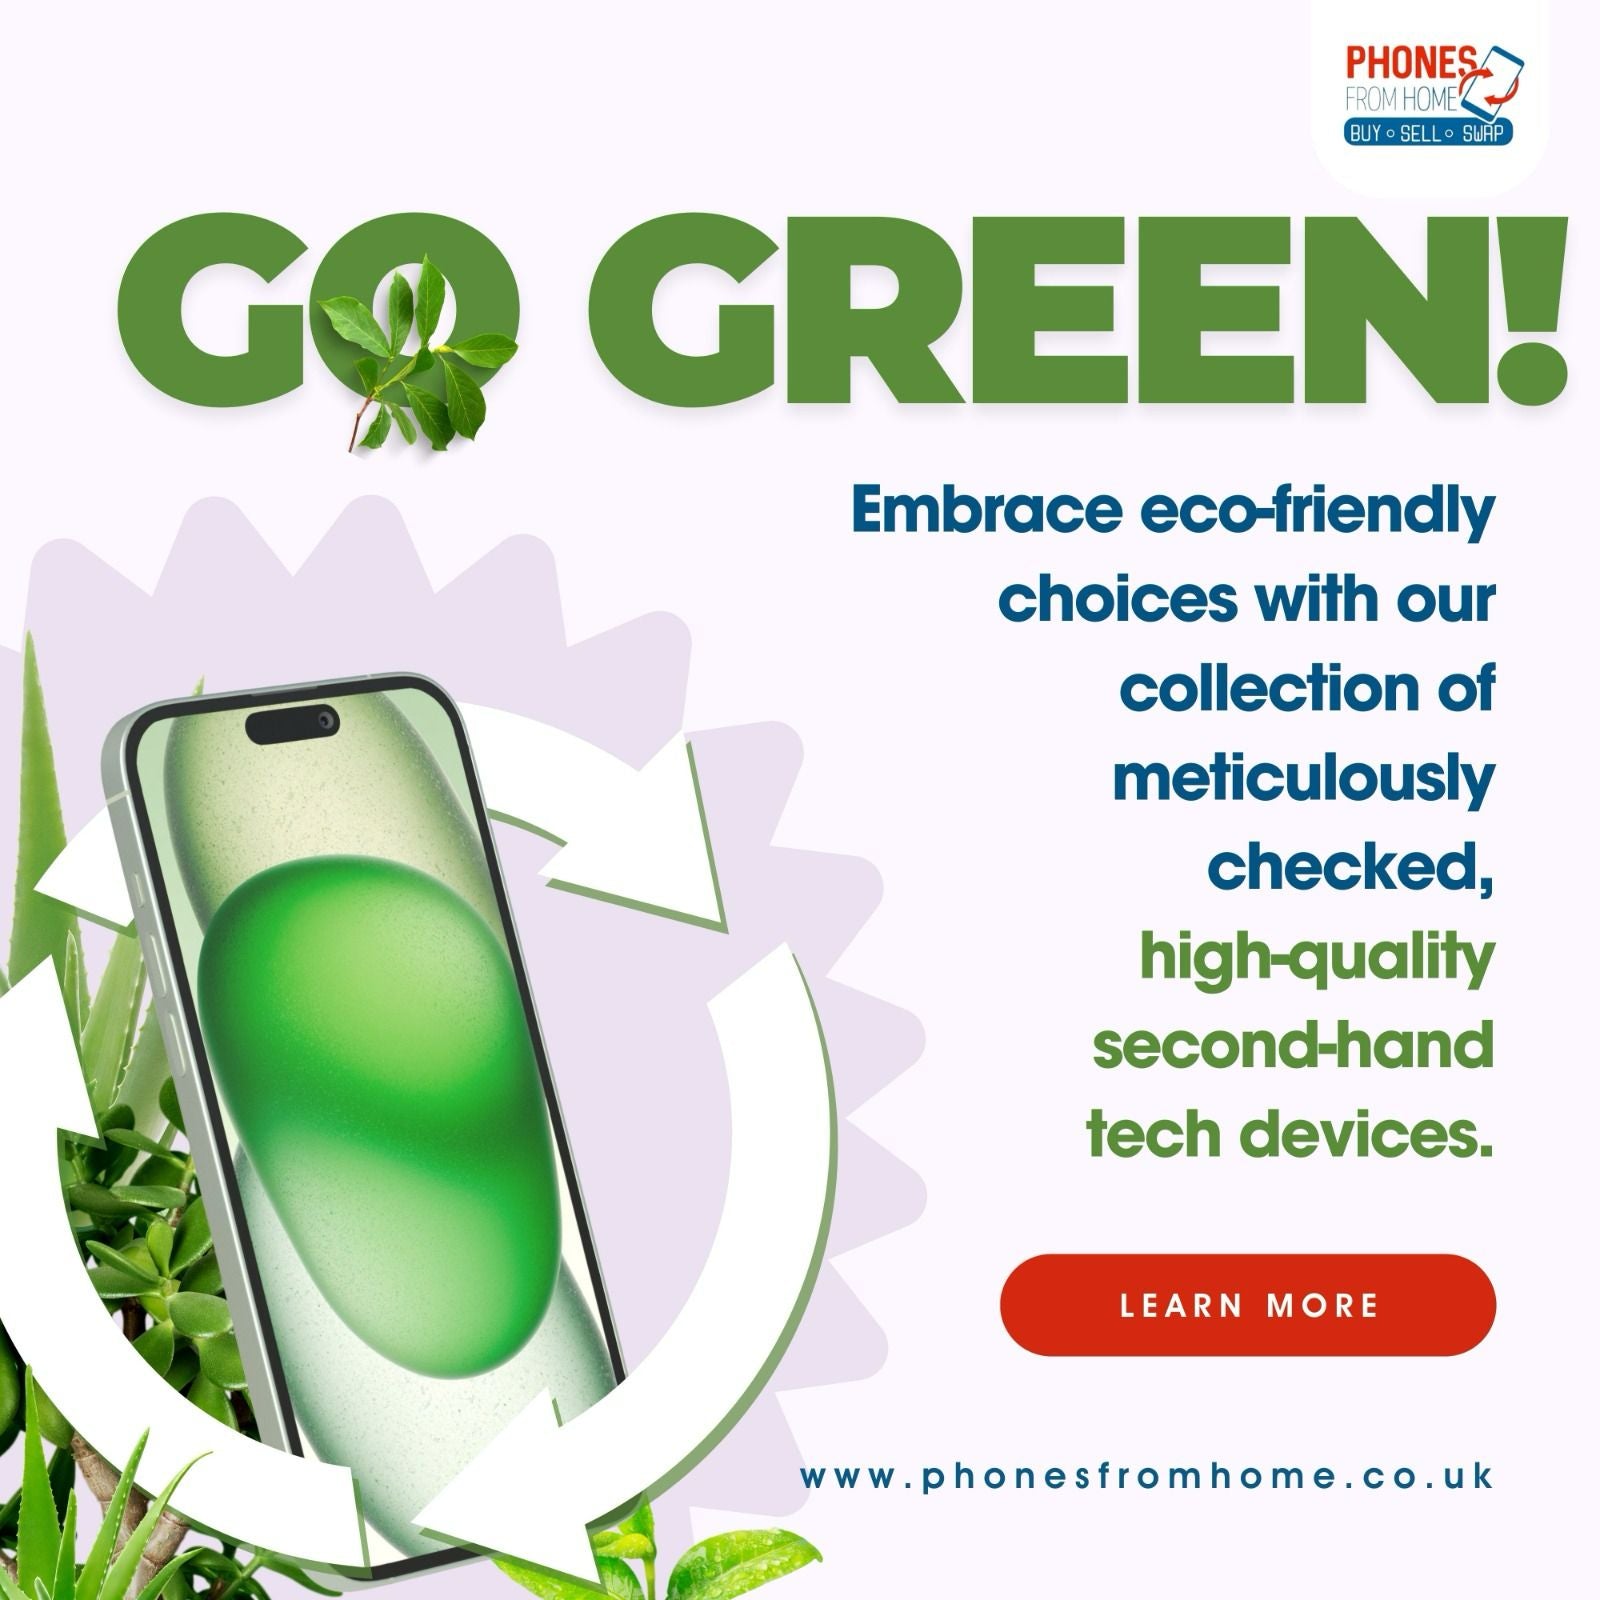 sustainable mobile phone service in UK